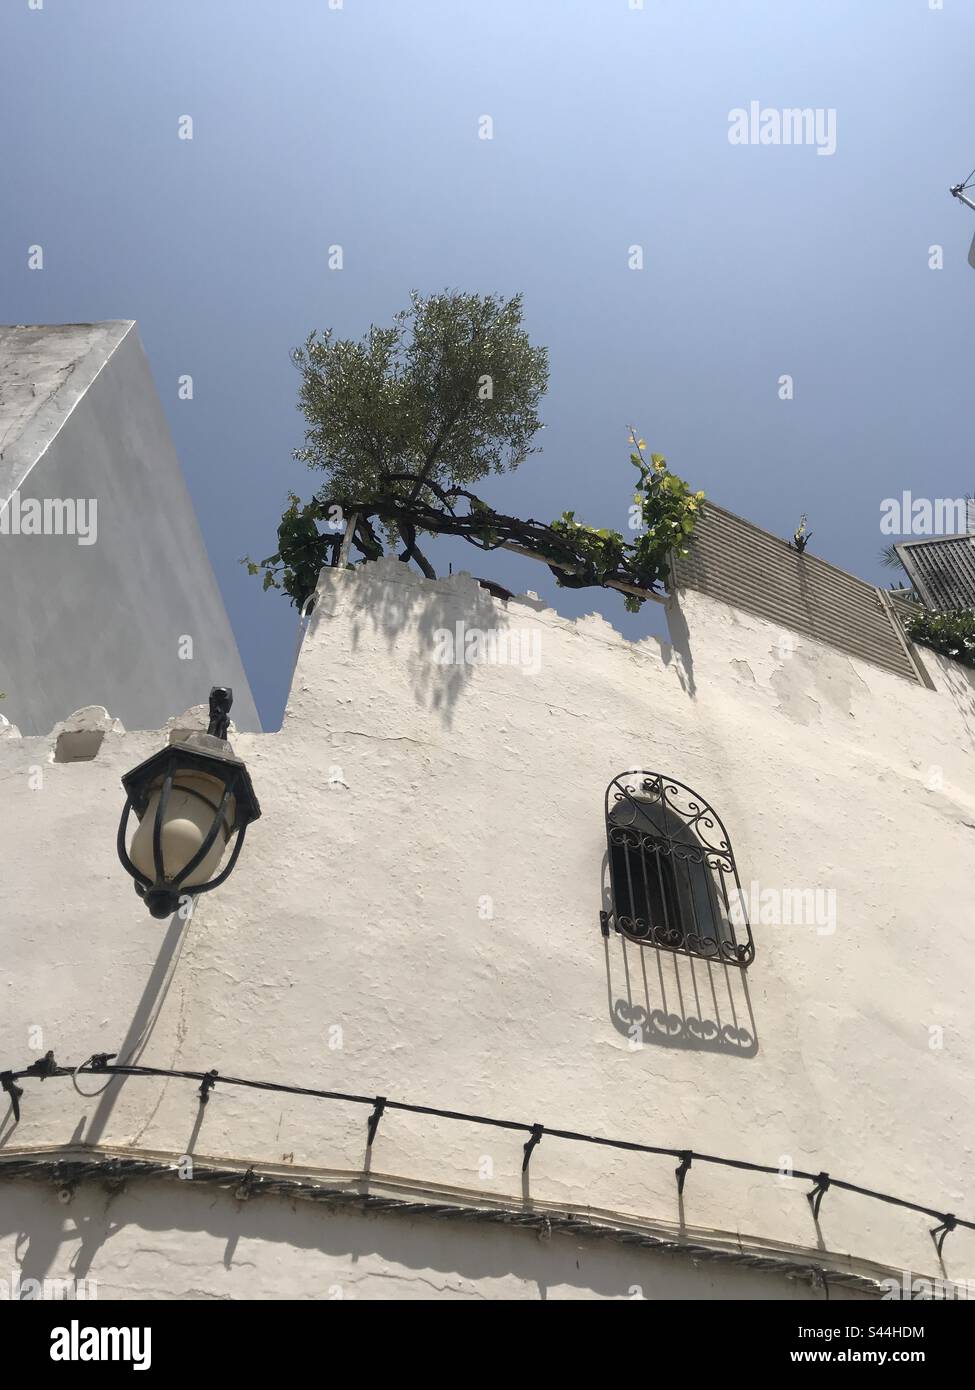 Latern and roof garden Assilah Morocco Stock Photo